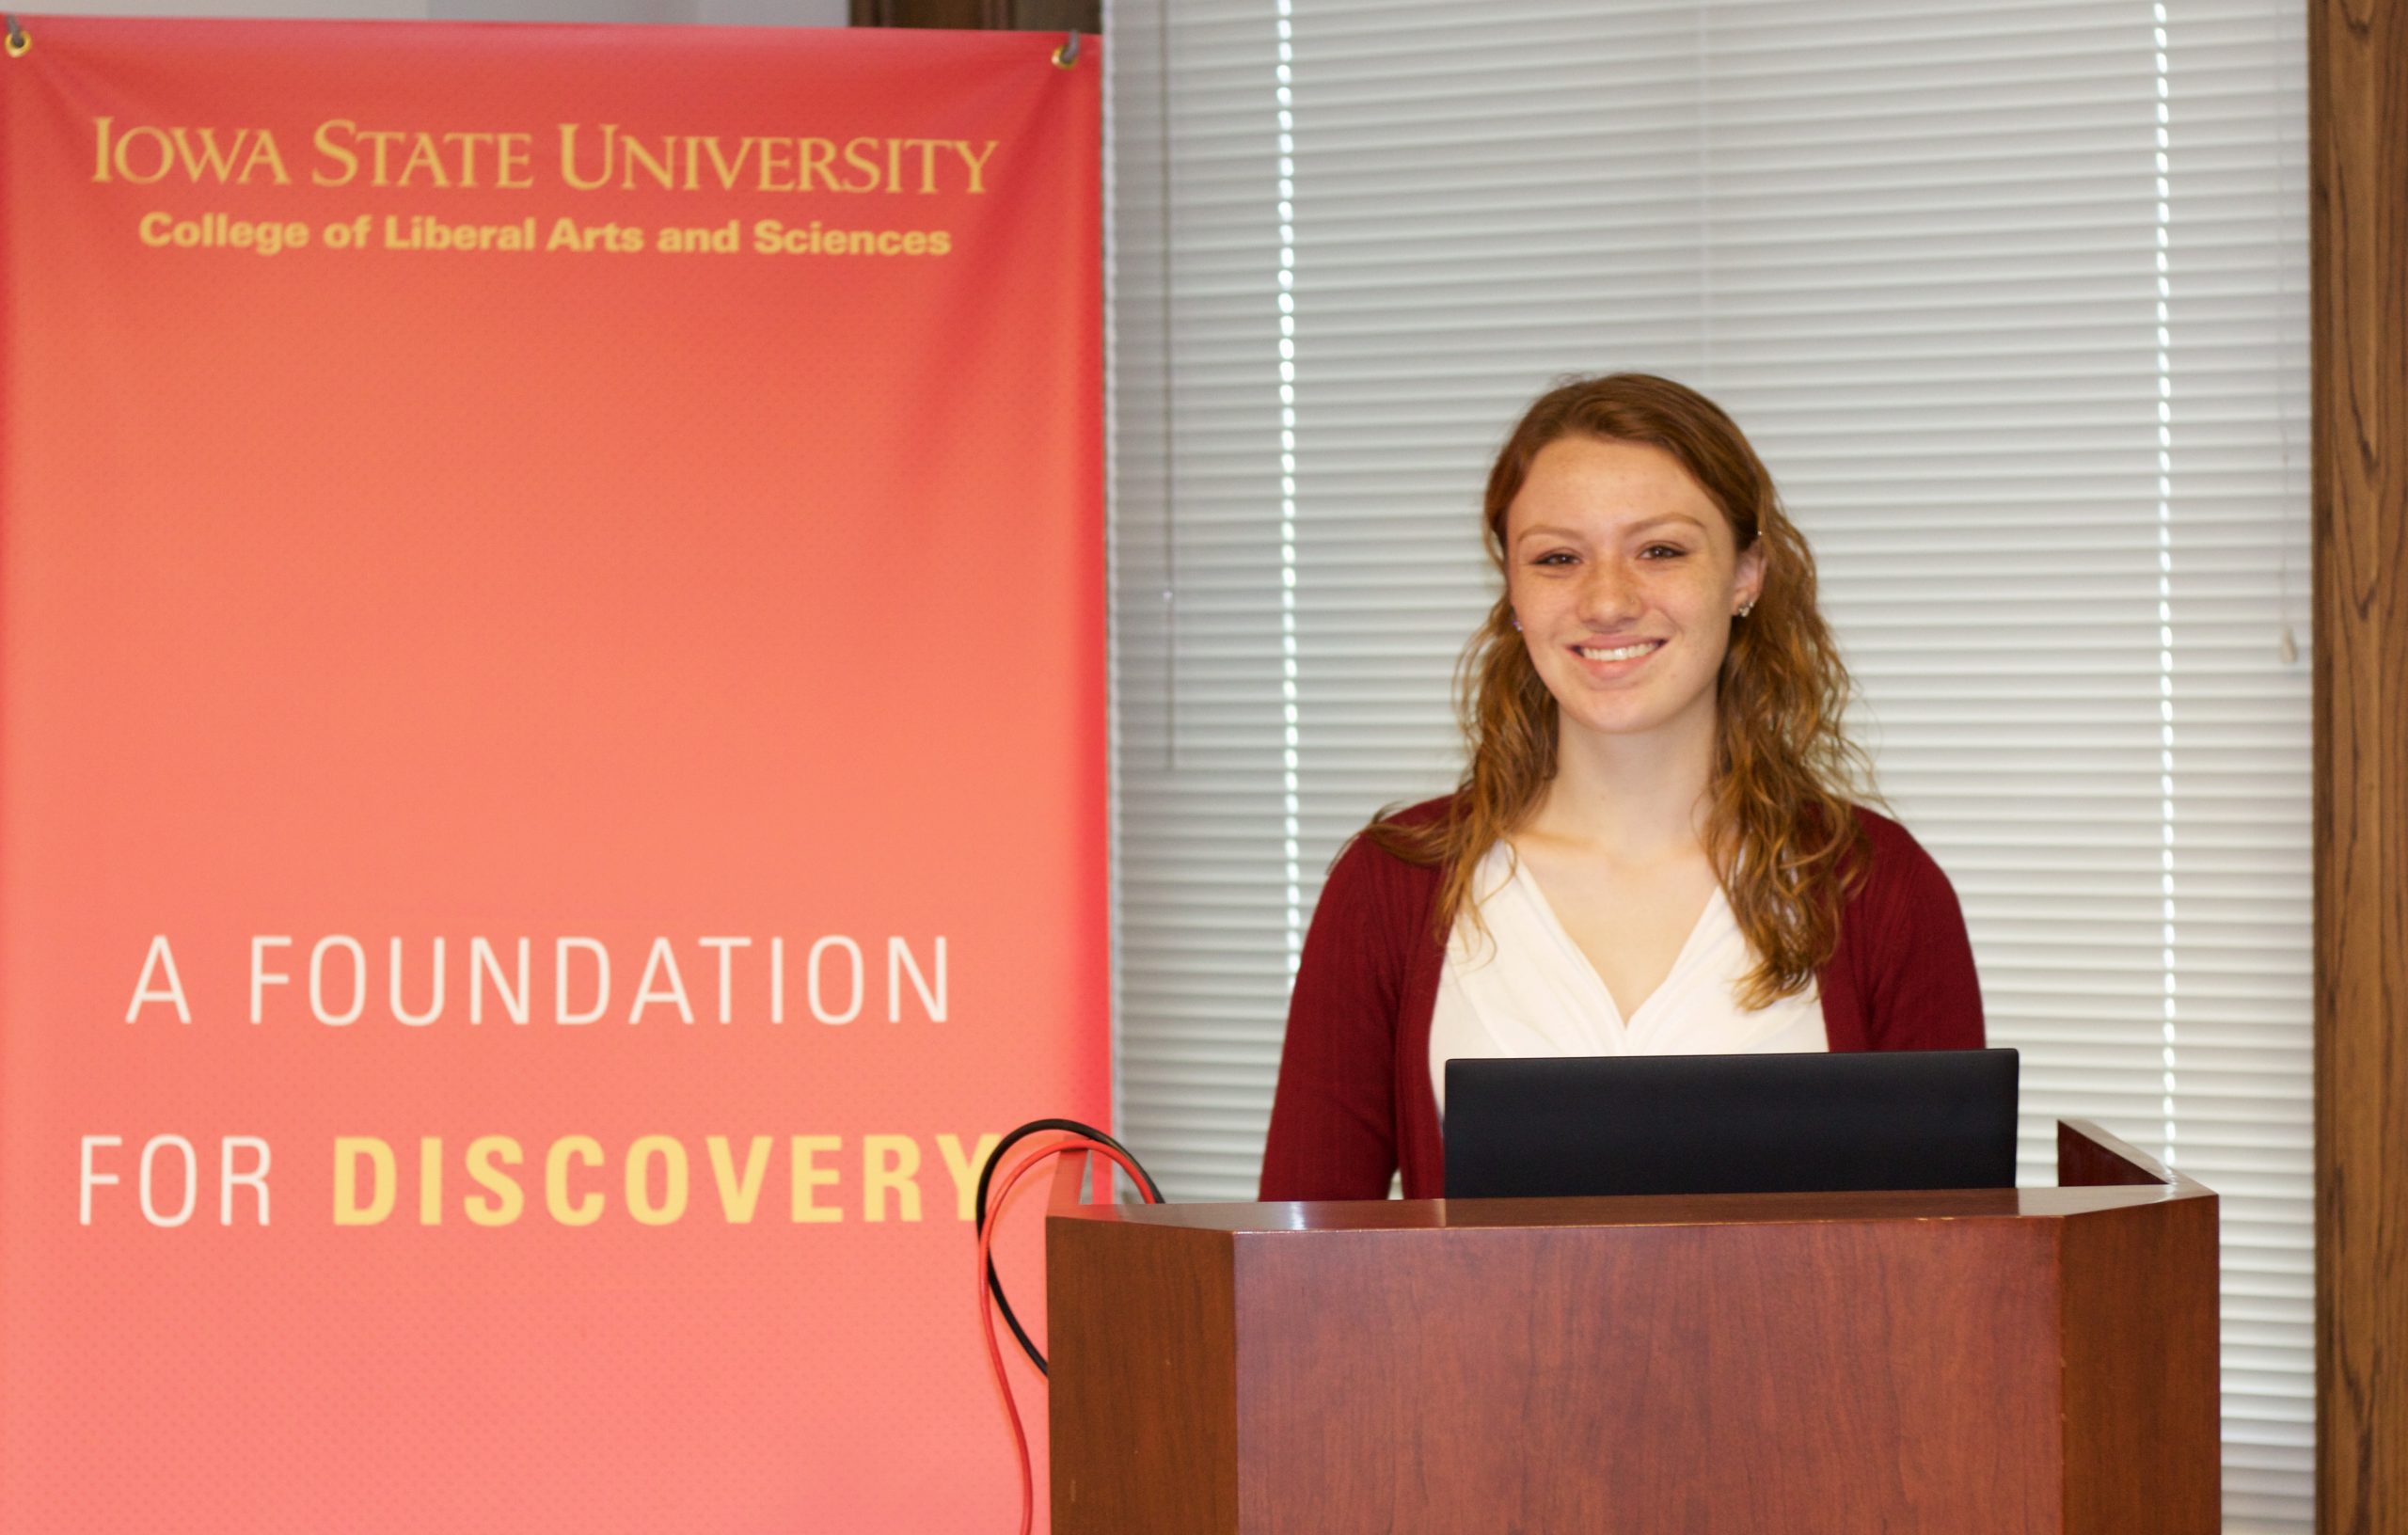 Sonya Haan stands behind a podium in front of a College of Liberal Arts sign, ready to present to university staff.